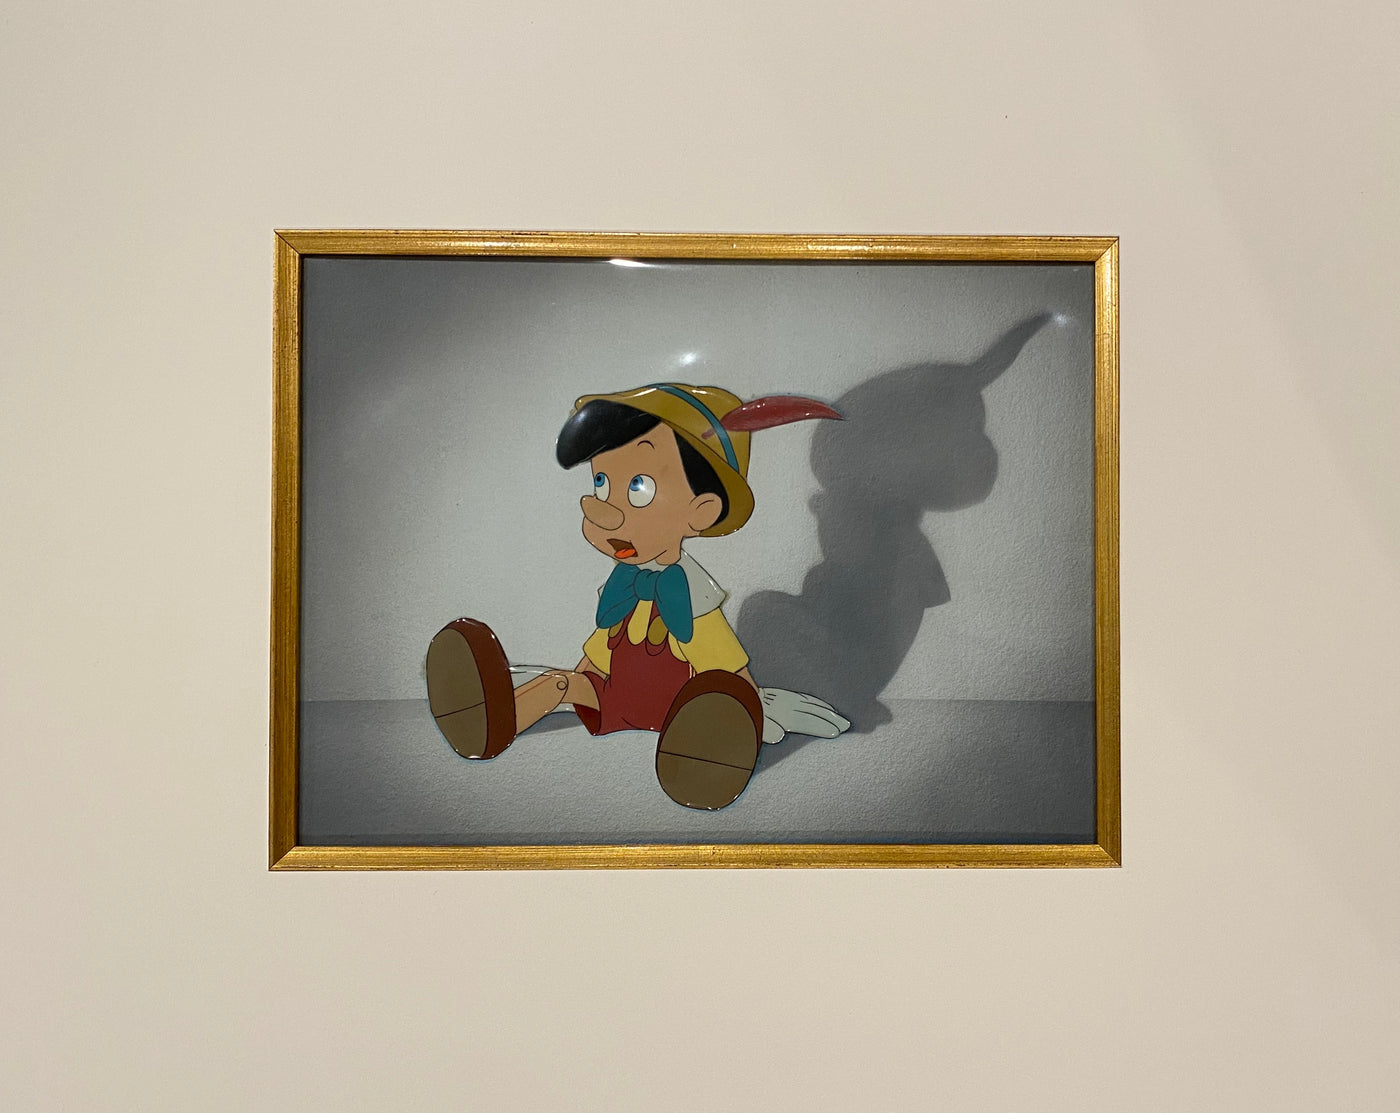 Original Walt Disney Production Cel of Pinocchio on a Courvoisier Background from Pinocchio (1940)